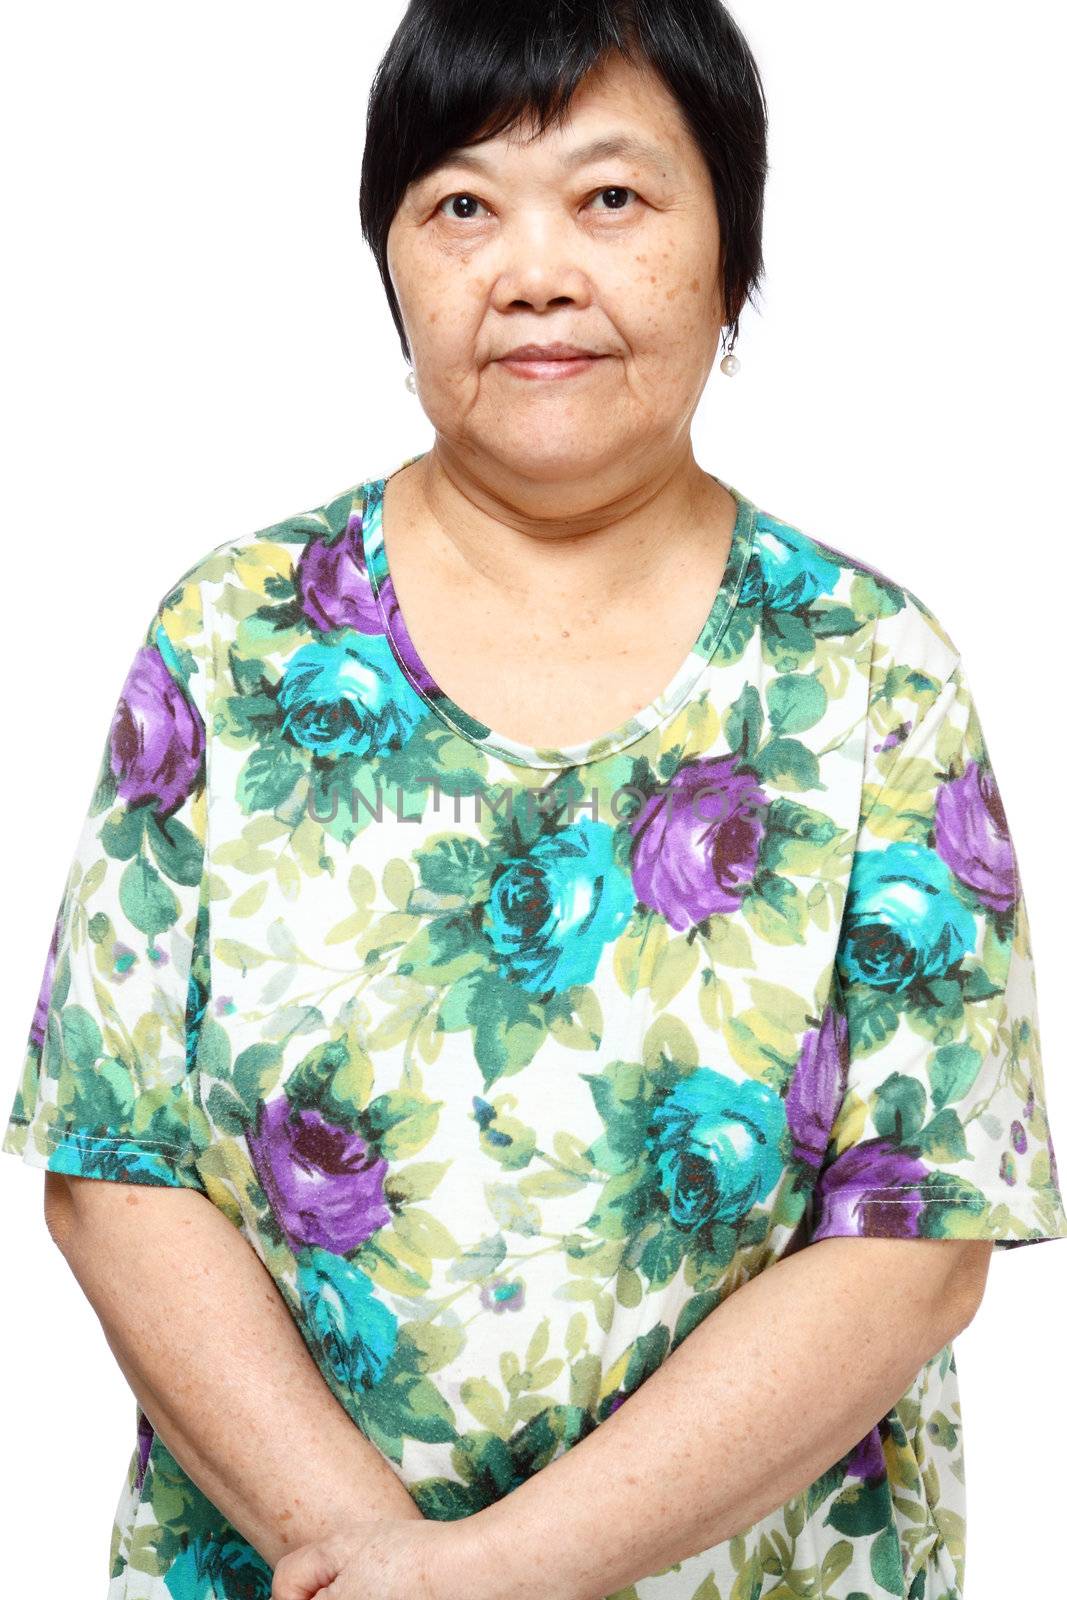 asian woman on white background 